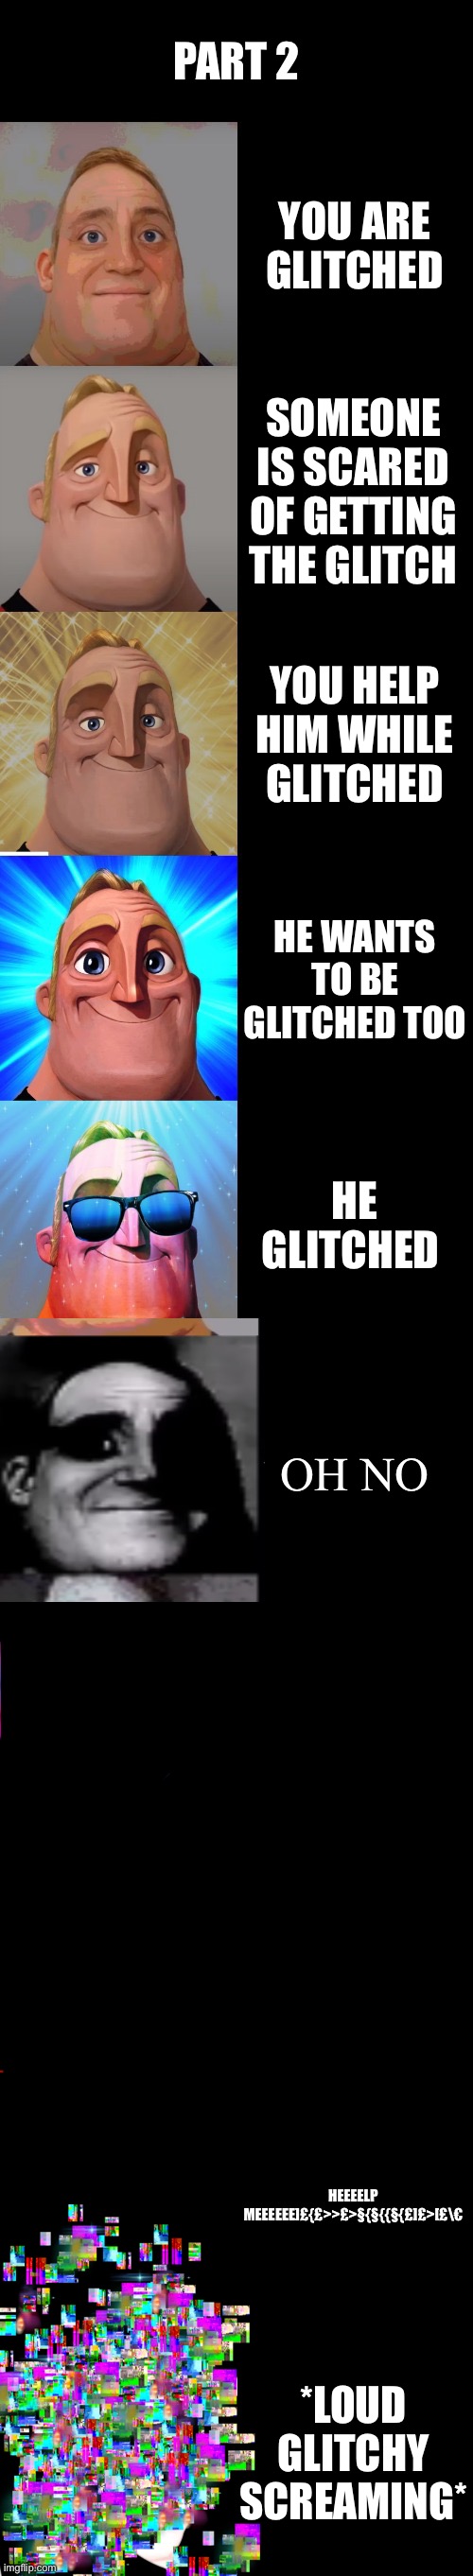 Part 2 | PART 2; YOU ARE GLITCHED; SOMEONE IS SCARED OF GETTING THE GLITCH; YOU HELP HIM WHILE GLITCHED; HE WANTS TO BE GLITCHED TOO; HE GLITCHED; OH NO; HEEEELP MEEEEEE]£{£>>£>§{§{{§{£]£>[£\€; *LOUD GLITCHY SCREAMING* | image tagged in mr incredible becoming canny | made w/ Imgflip meme maker